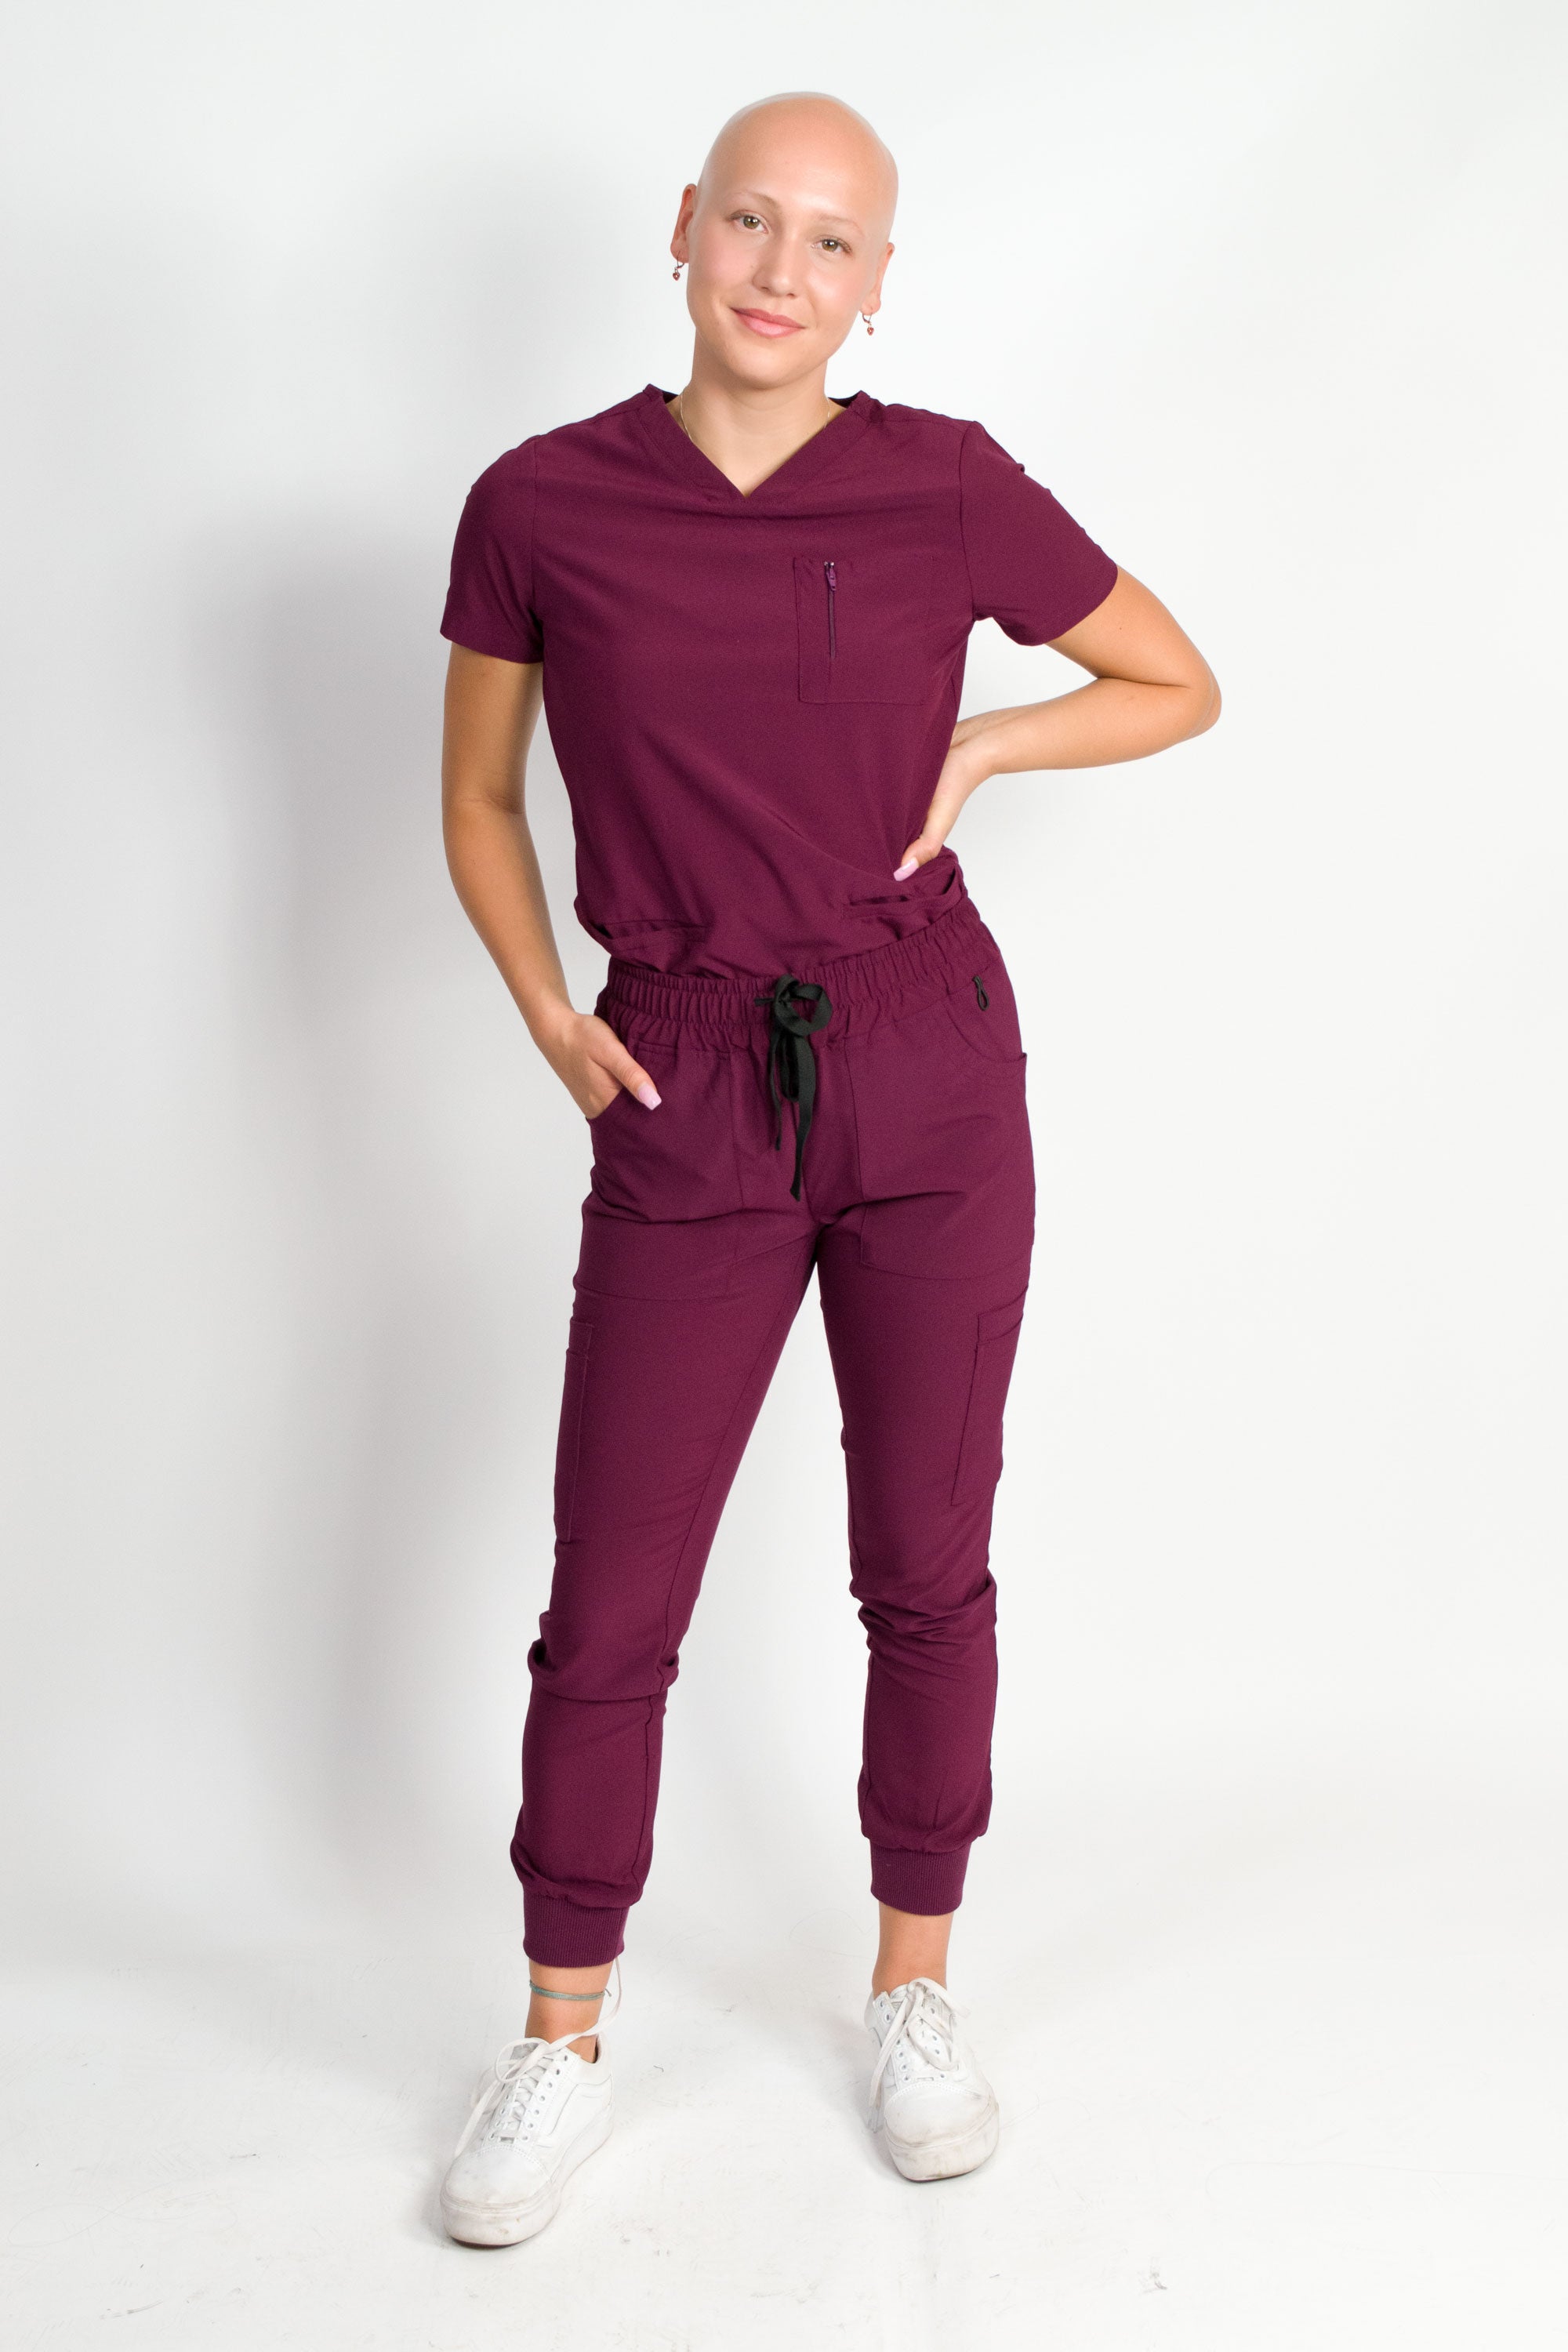 Fleur Women's Stretch Scrub Set with Zip Chest Pocket Top and Knit